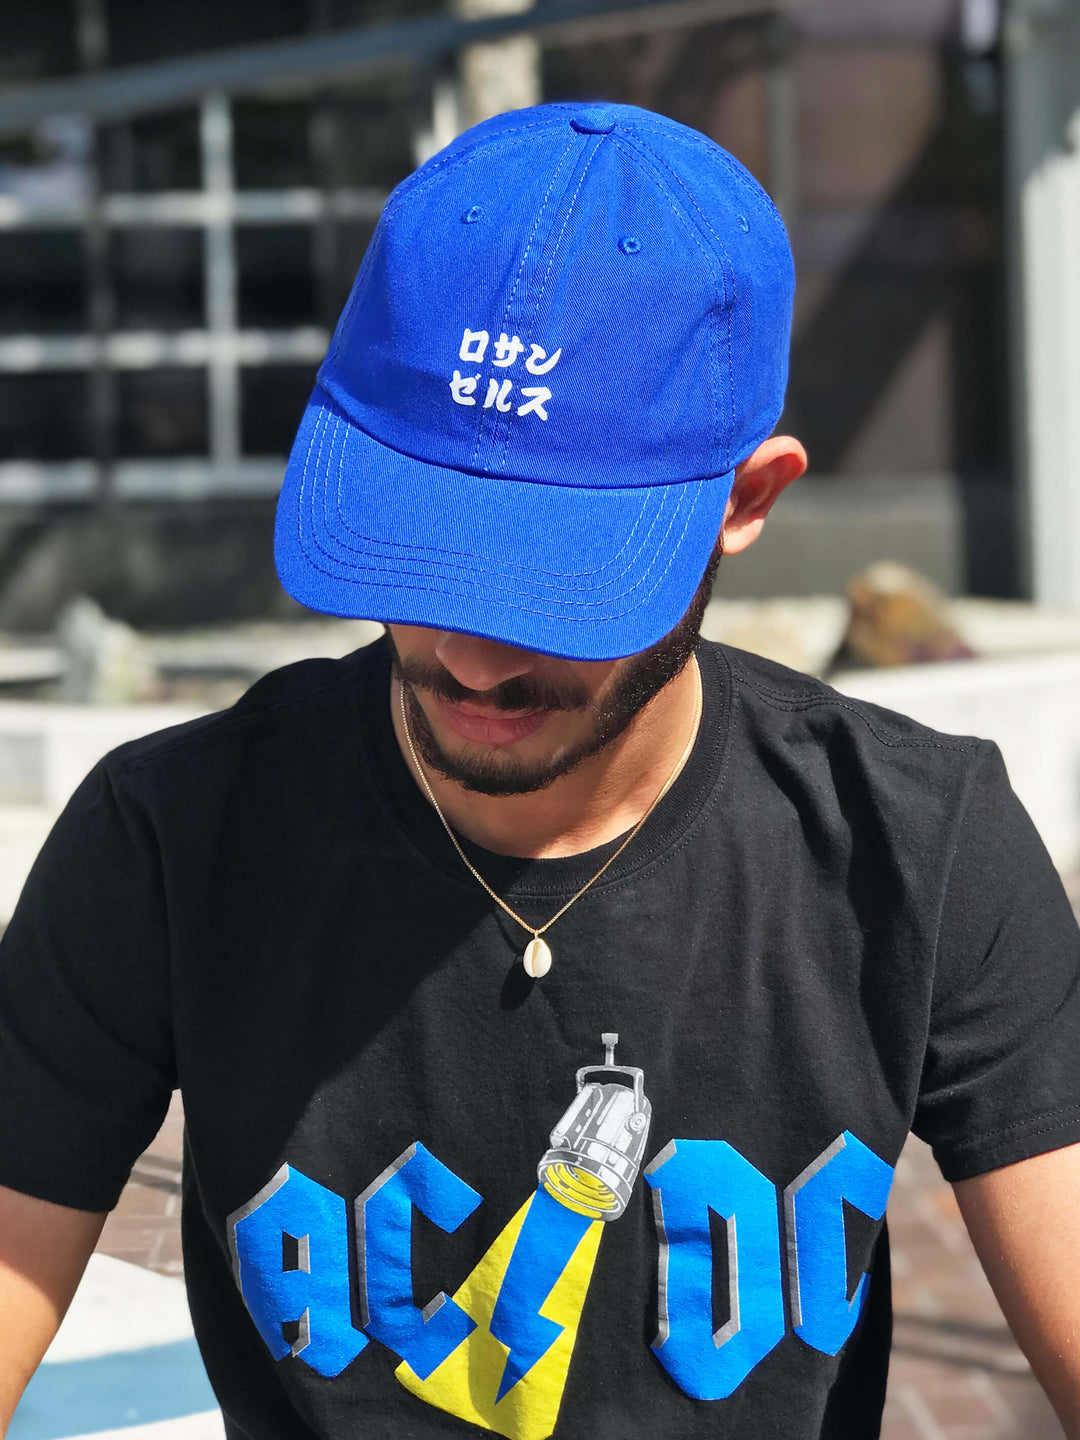 A model wearing a blue baseball cap that reads 'Los Angeles' in Japanese.